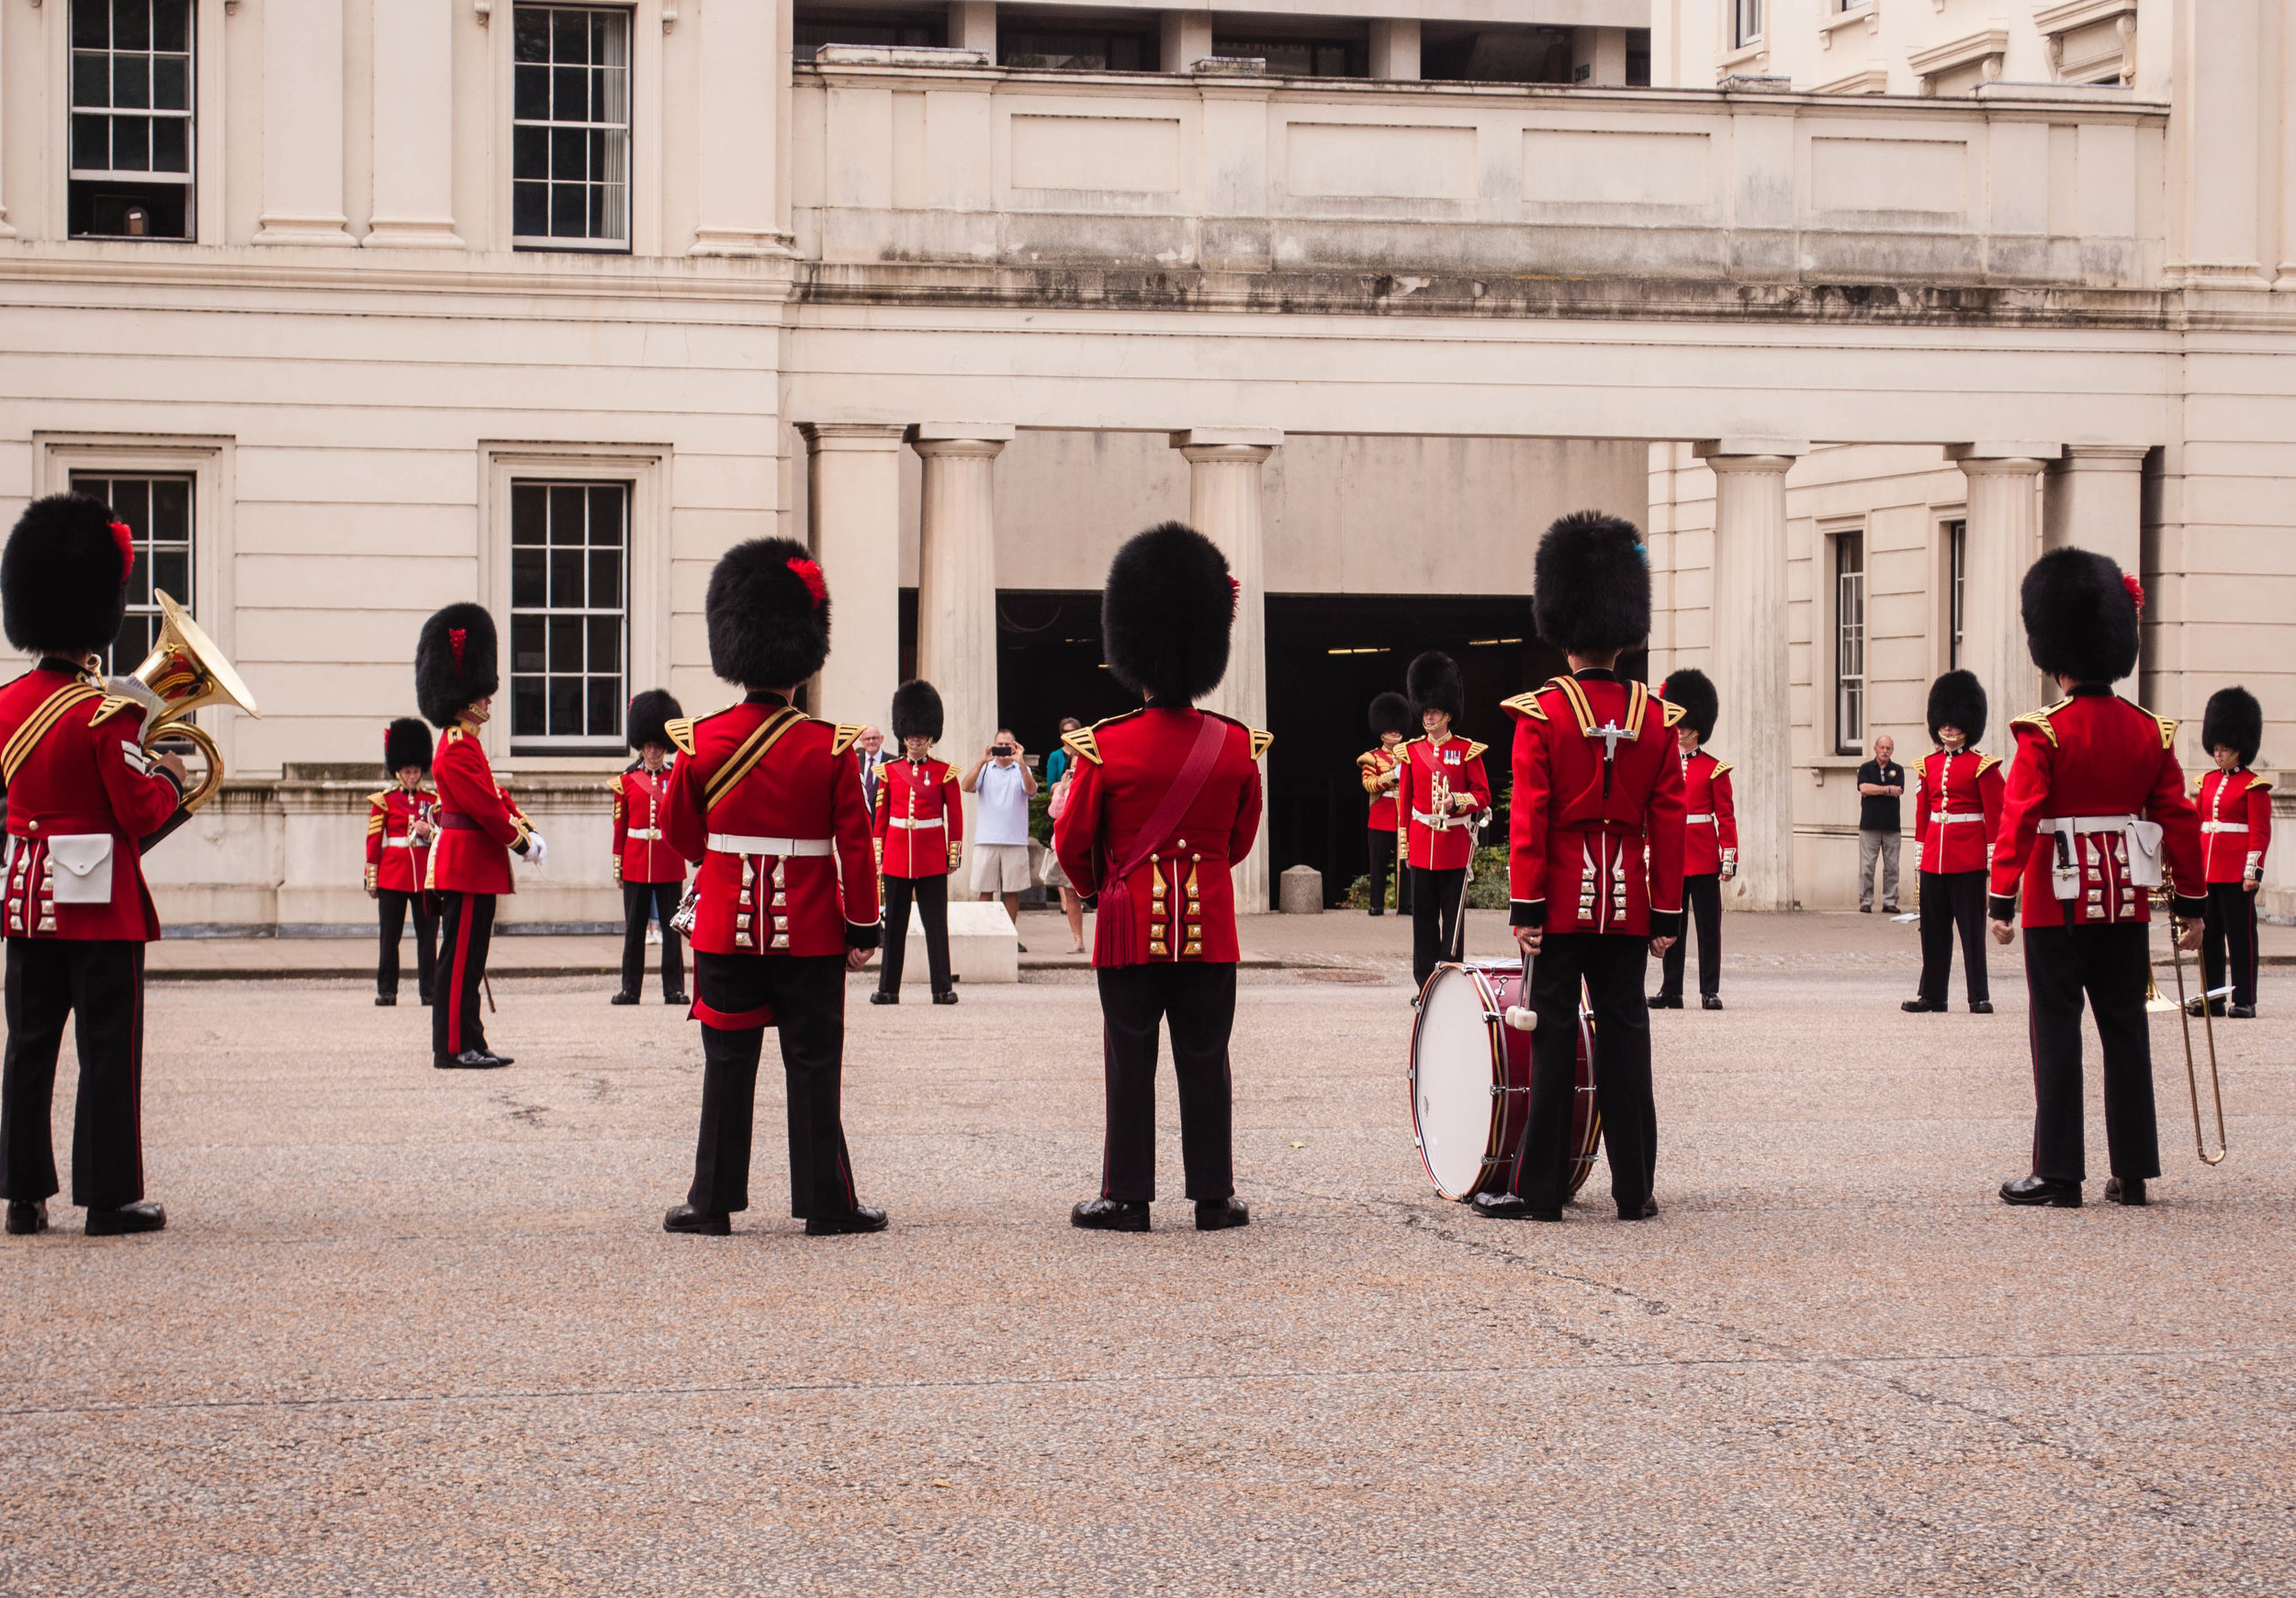 Guard changing in the Buckingham Palace. This landmark can be seeing during a long layover in London (UK)